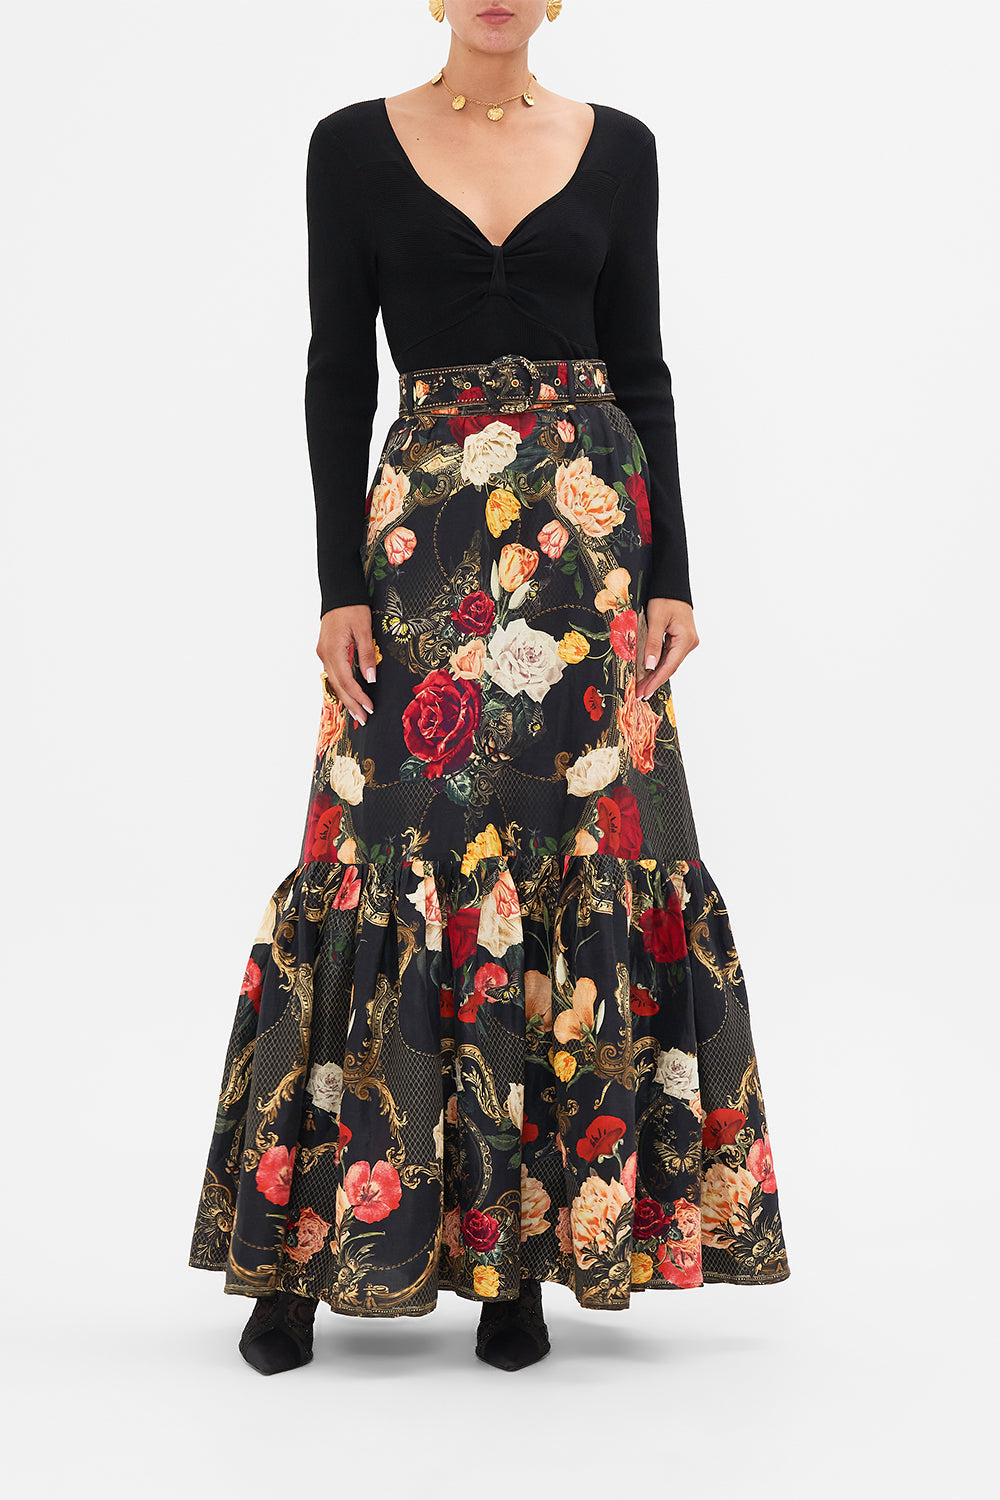 CAMILLA Black Skirt with Deep Hem Frill and Belt in Magic in the Manuscripts